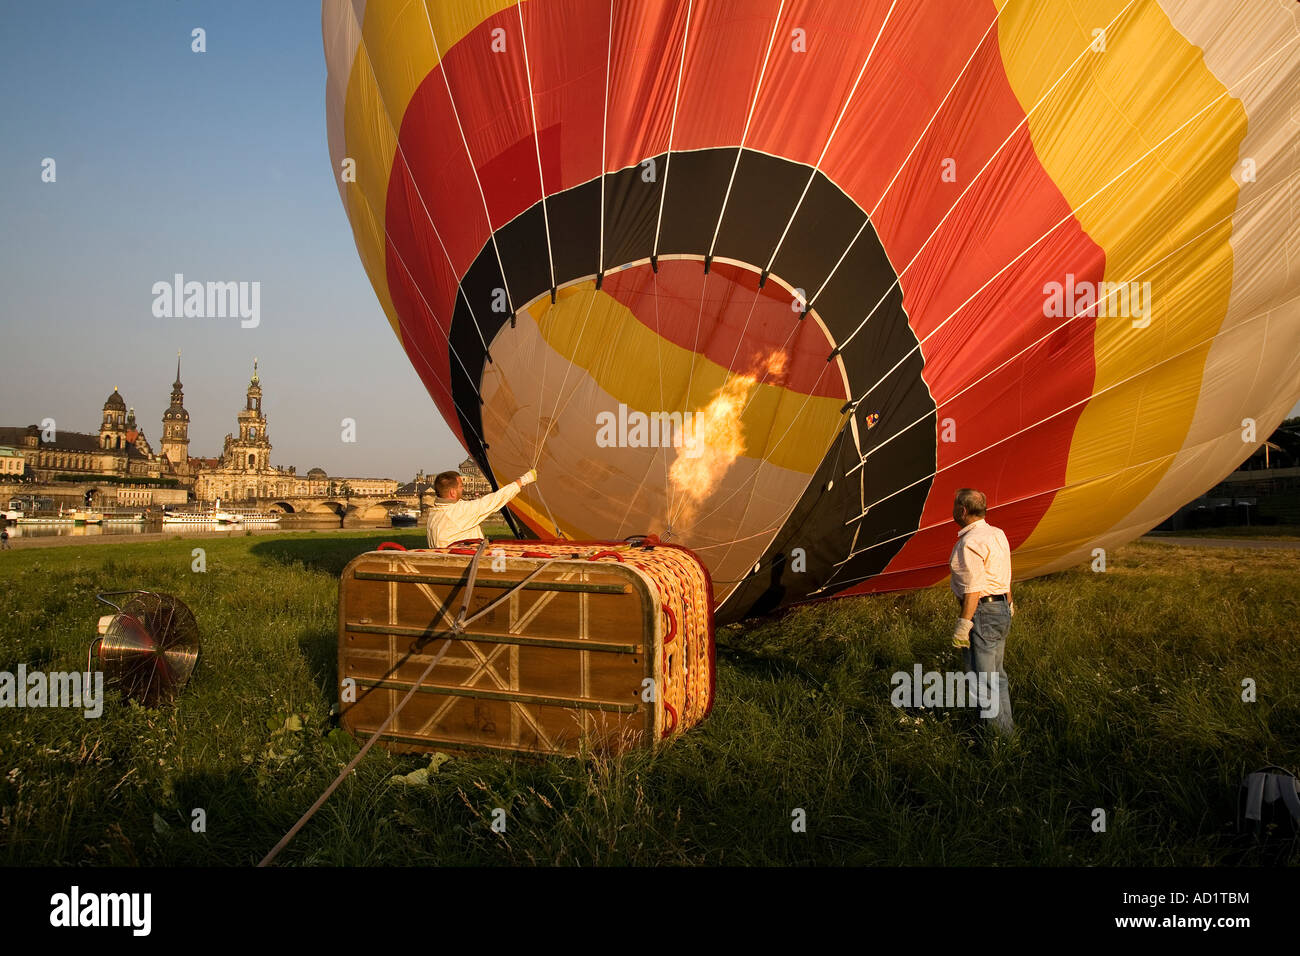 German Hotair Balloon High Resolution Stock Photography and Images - Alamy